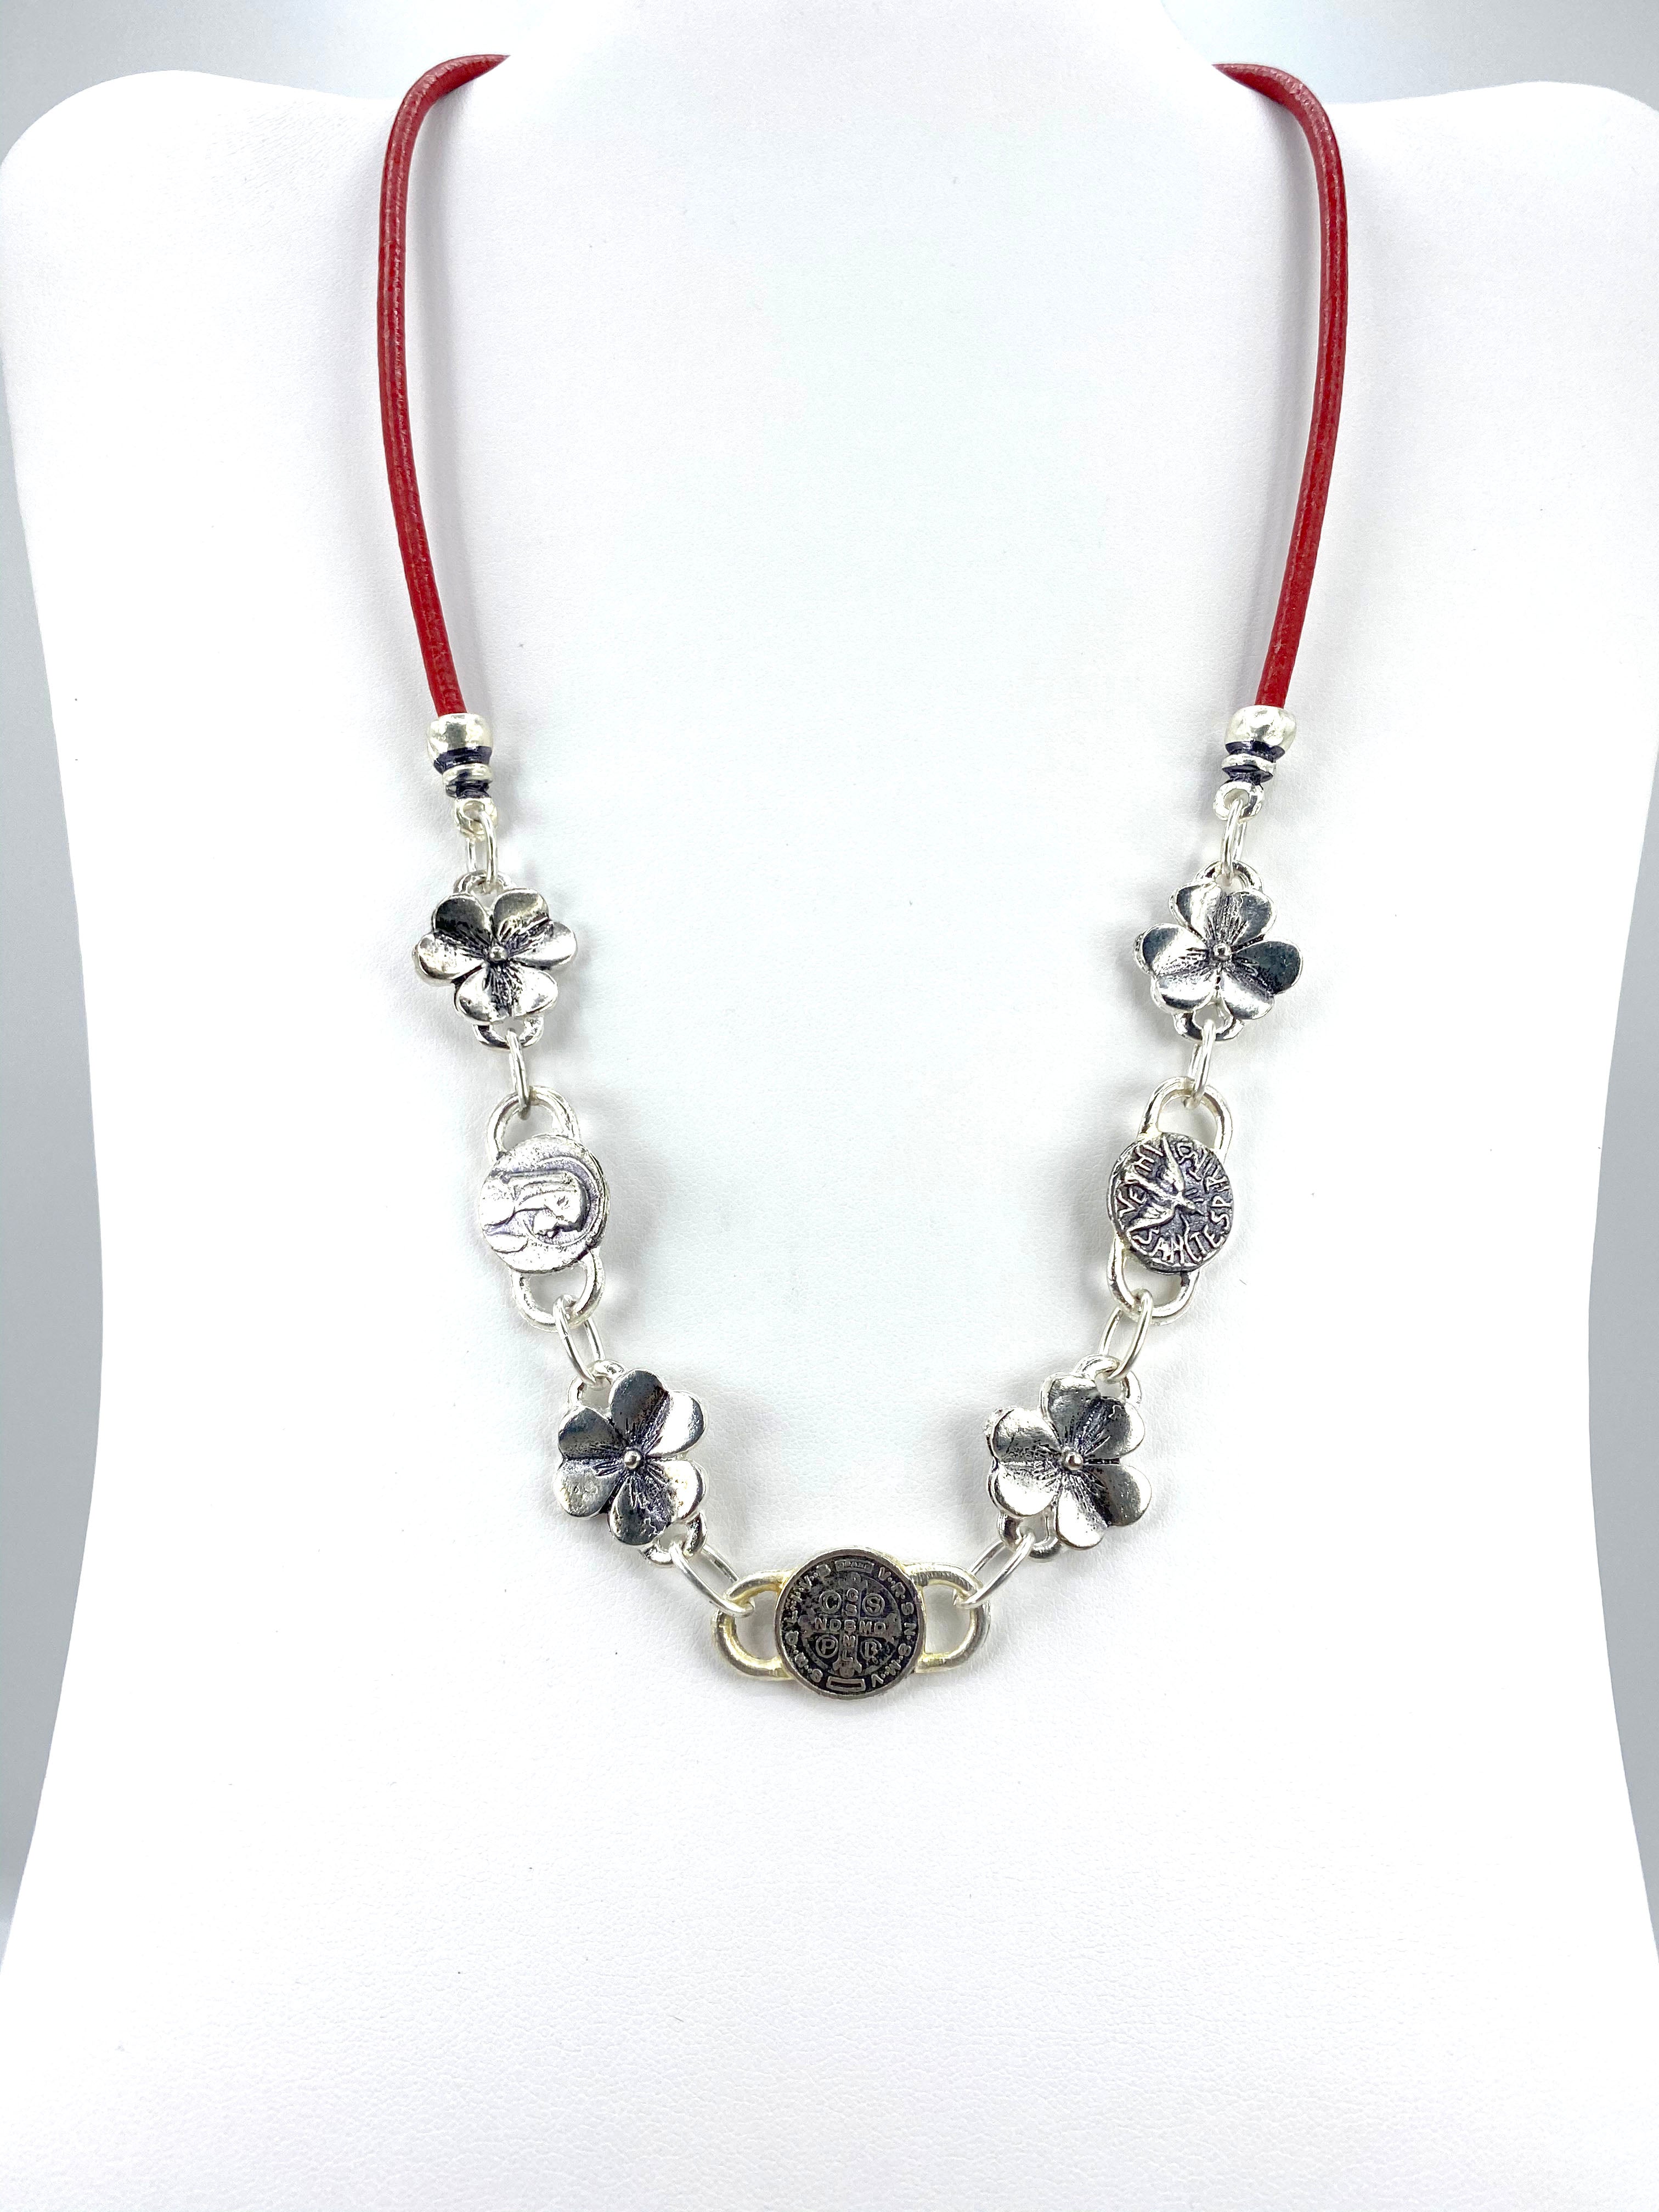 Vintage Flower Necklace of The Virgin Mary, Holy Spirit, and St Benedict Handmade Jewelry with Genuine Leather by Graciela's Collection